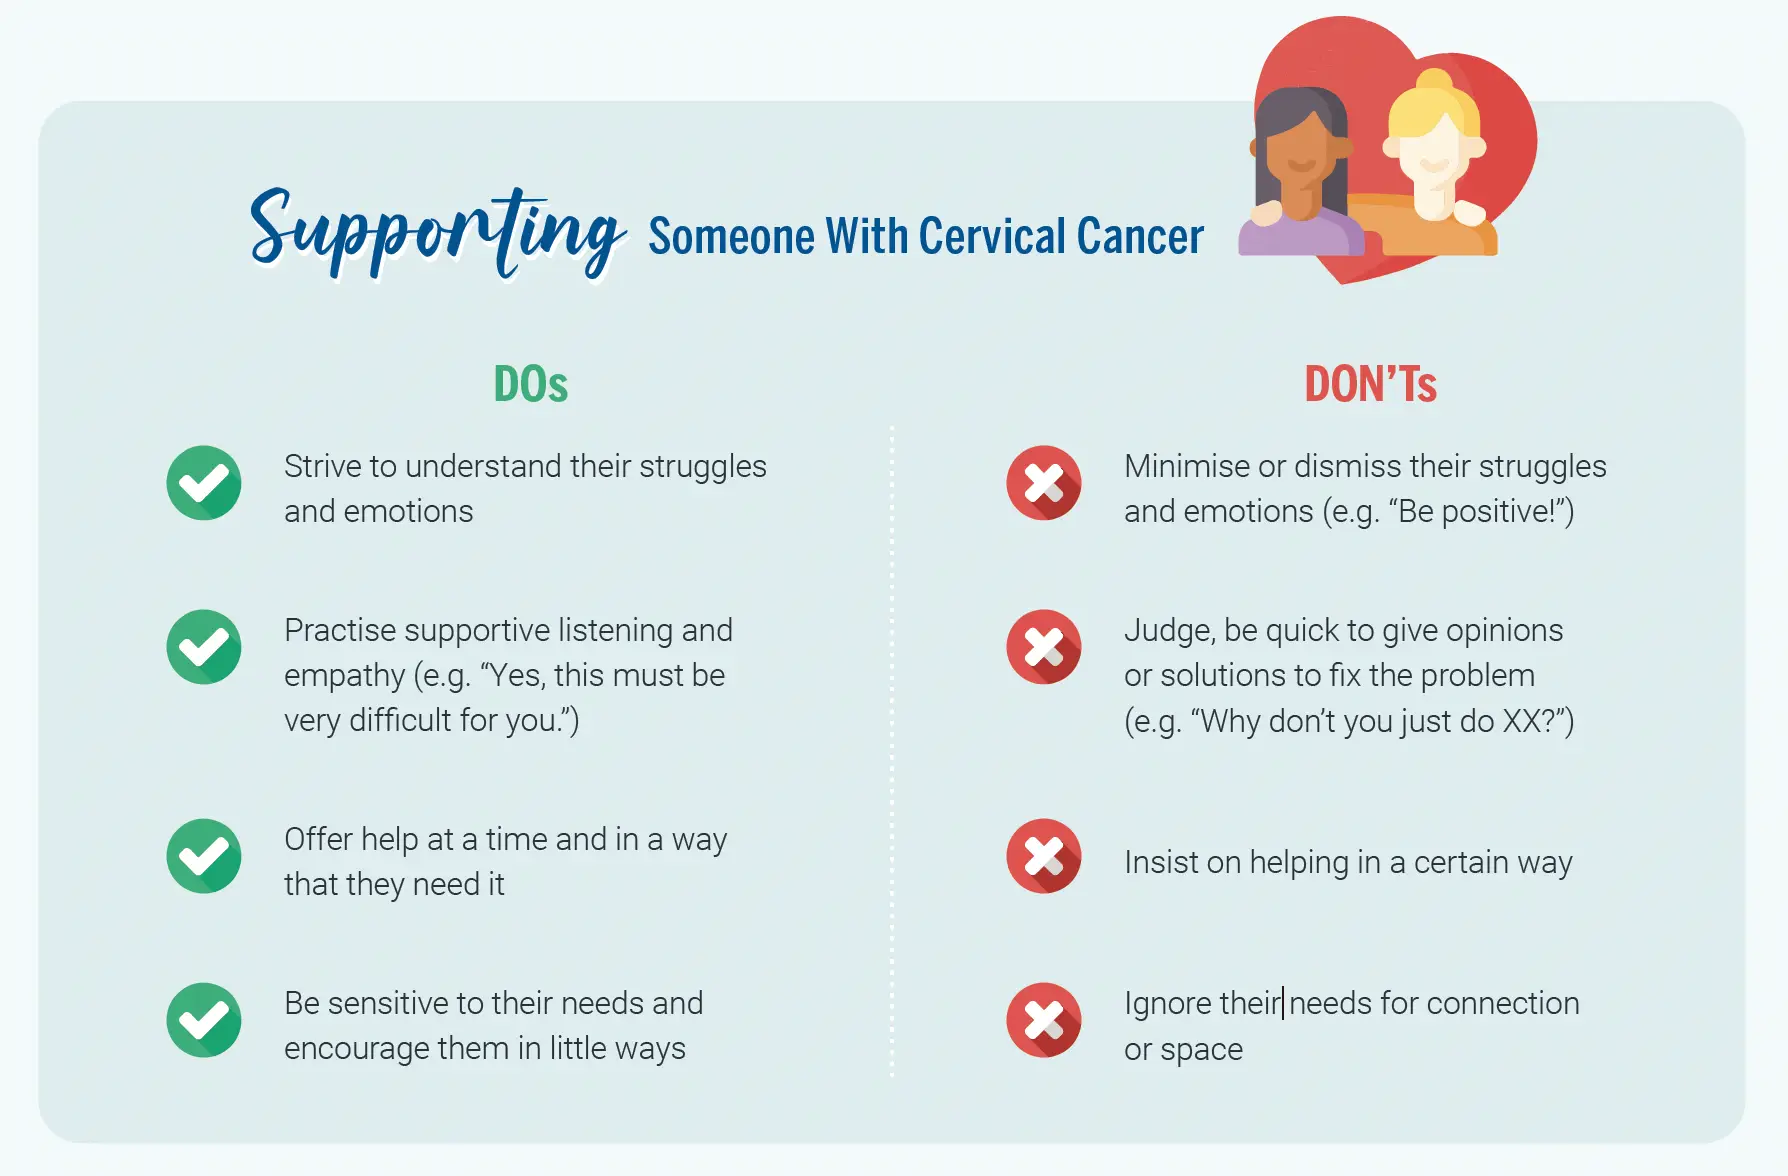 Supporting someone with cervical cancer